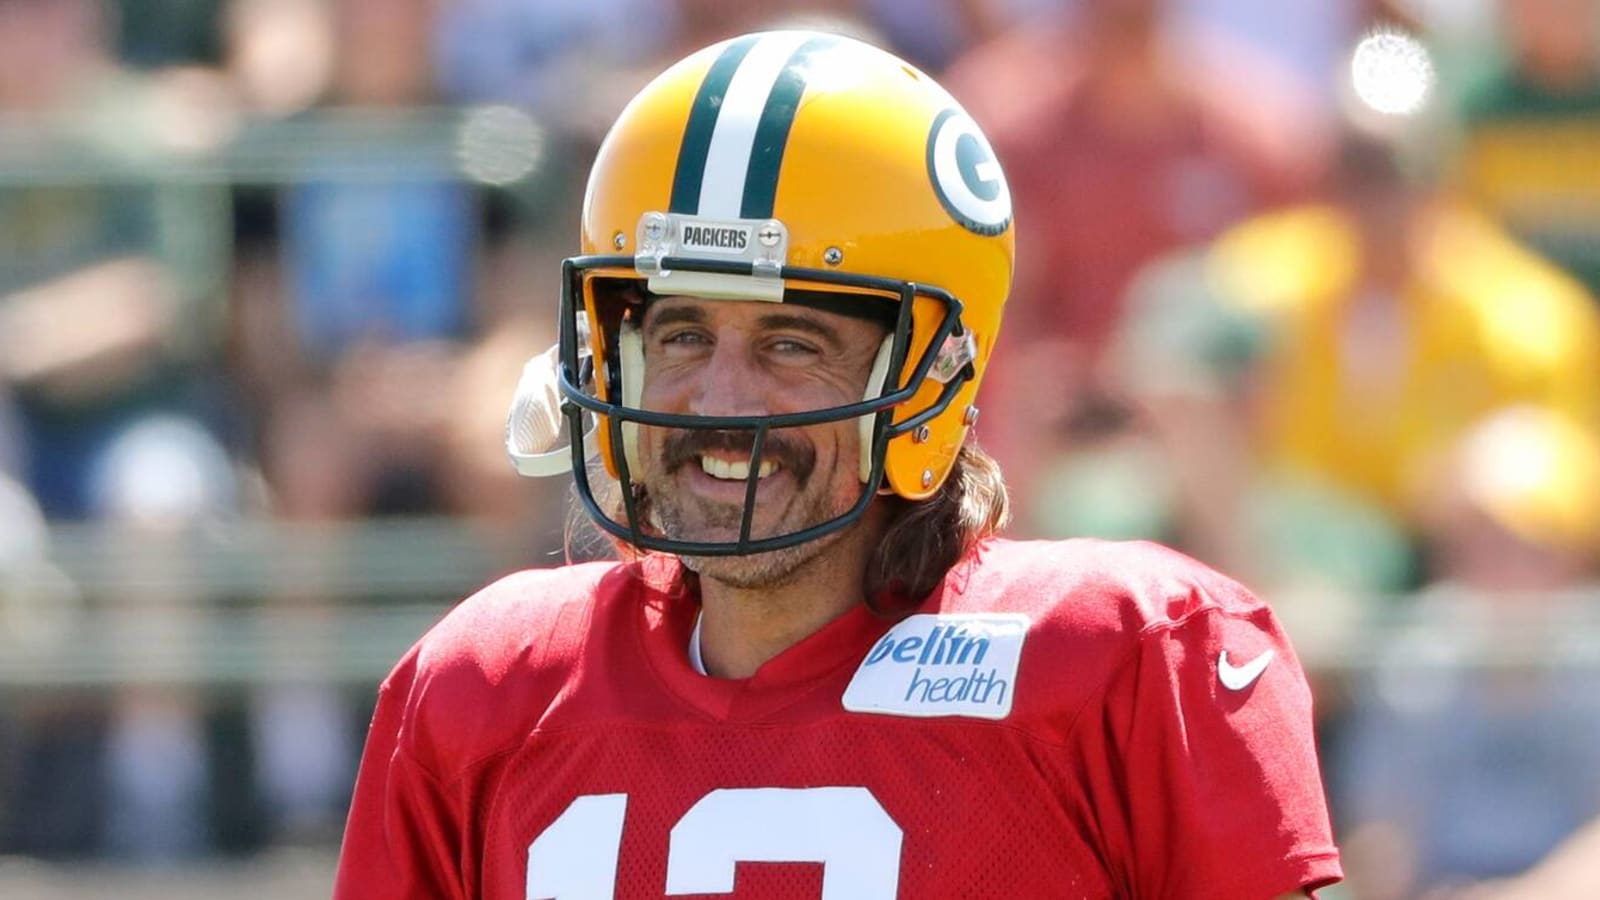 Aaron Rodgers on playing career: 'The end is near'